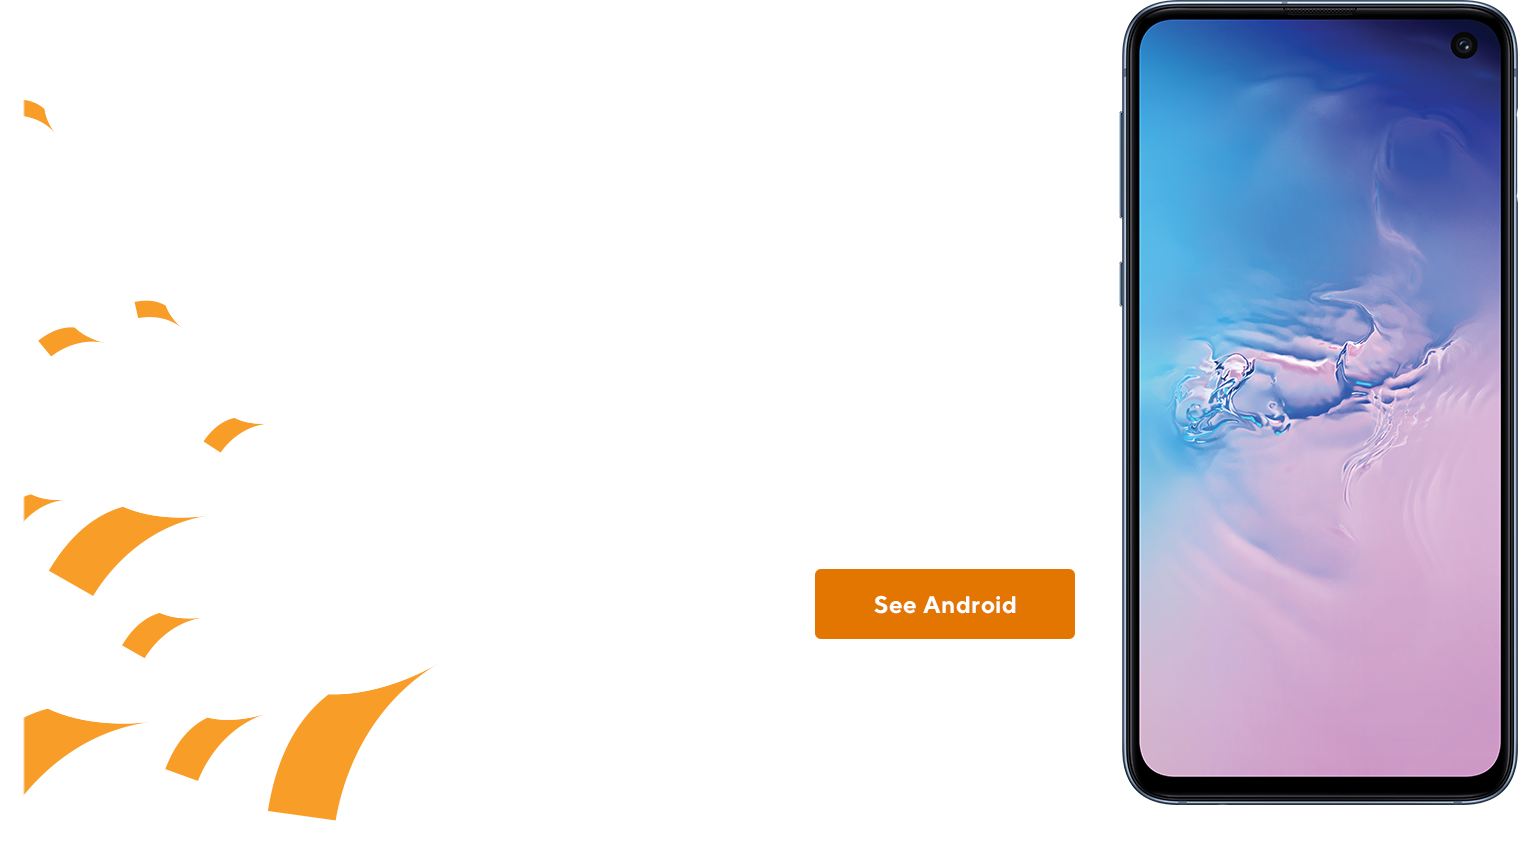 Android. Choose from tons of amazing Android phones. Get the latest and greatest phones from some of the best brands like Samsung, LG and motorola.